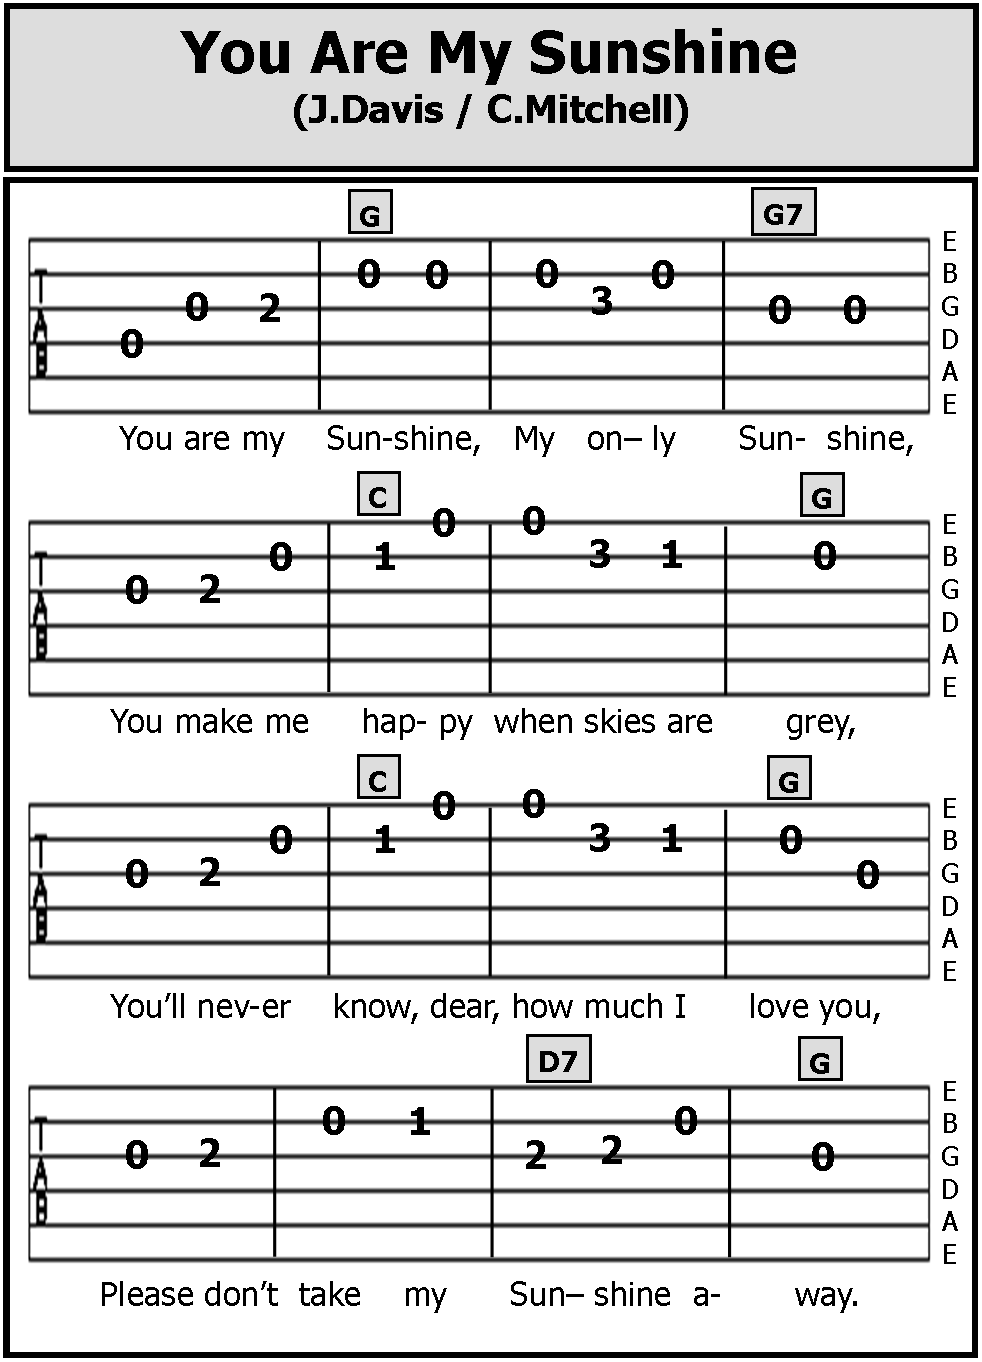 Guitar Tab Songs You Are My Sunshine Guitar Tabs Songs Ukulele Chords Songs Ukulele Tabs Songs